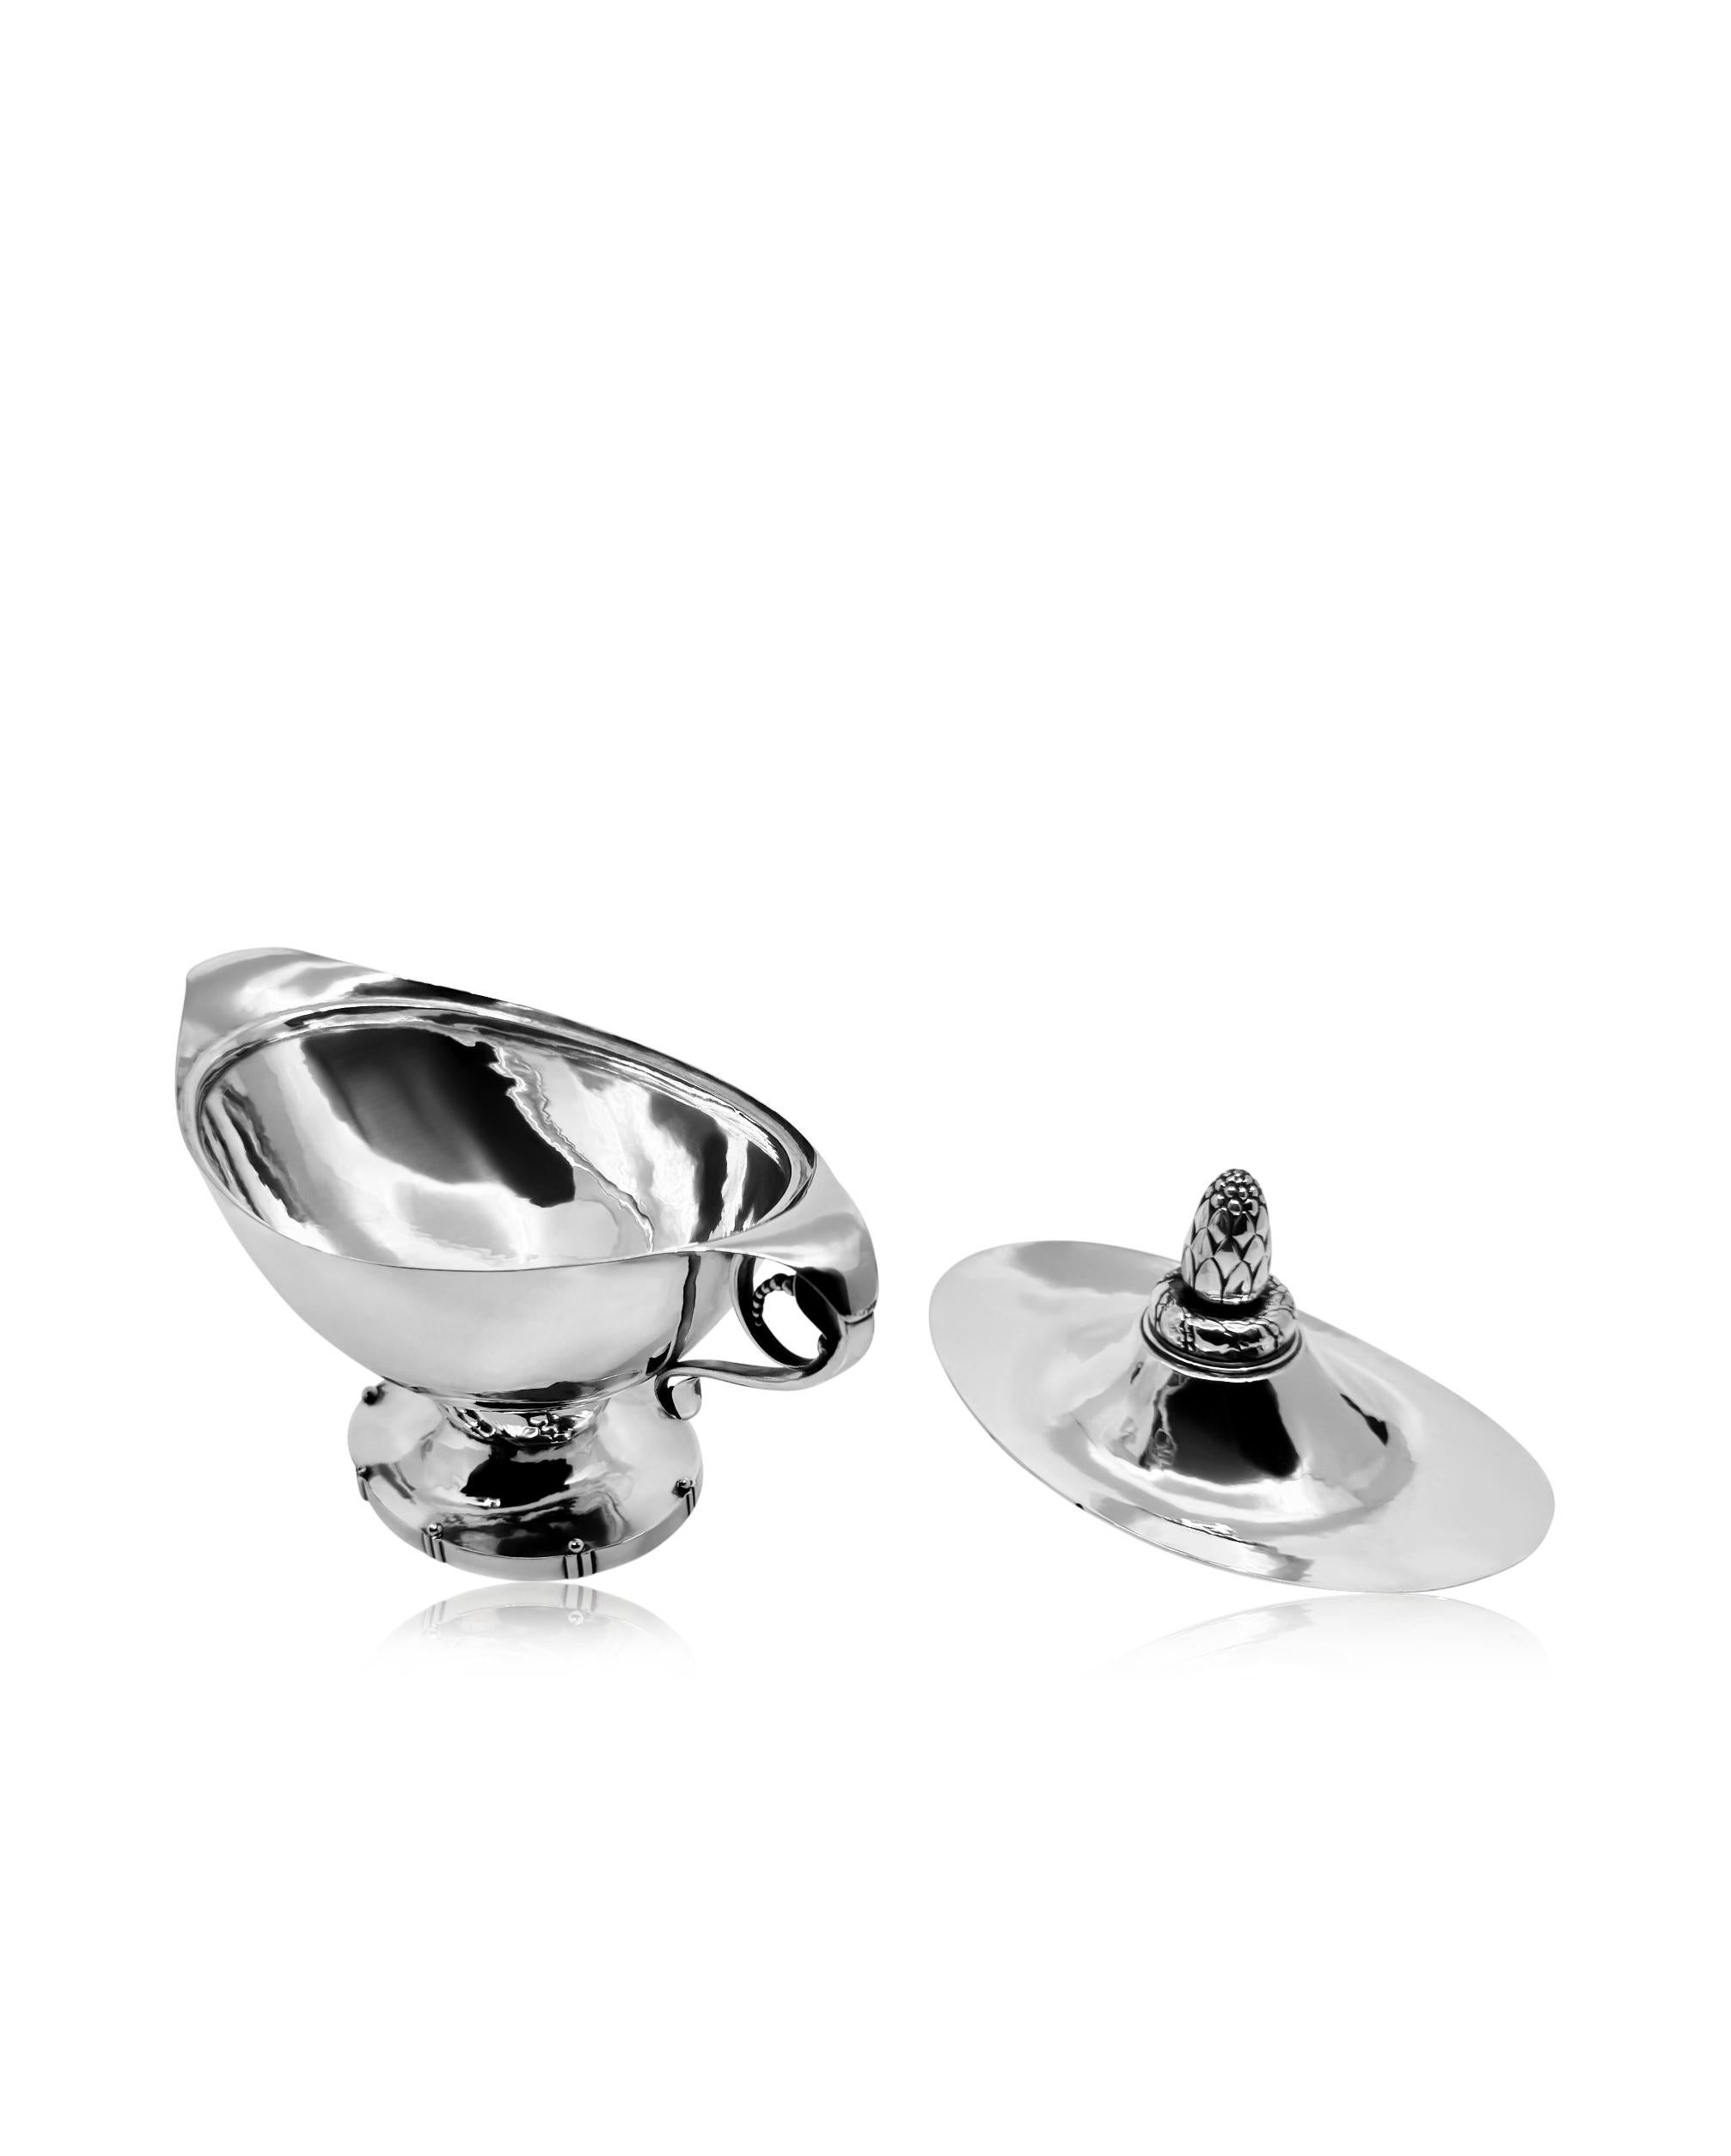 An exceptional and early  Georg Jensen 830 silver bonbonniere, design #170 by Georg Jensen in 1916. The vessel, crafted in an oval shape, features meticulous hand hammering, and is adorned with a gracefully curved lid topped with an acorn finial.